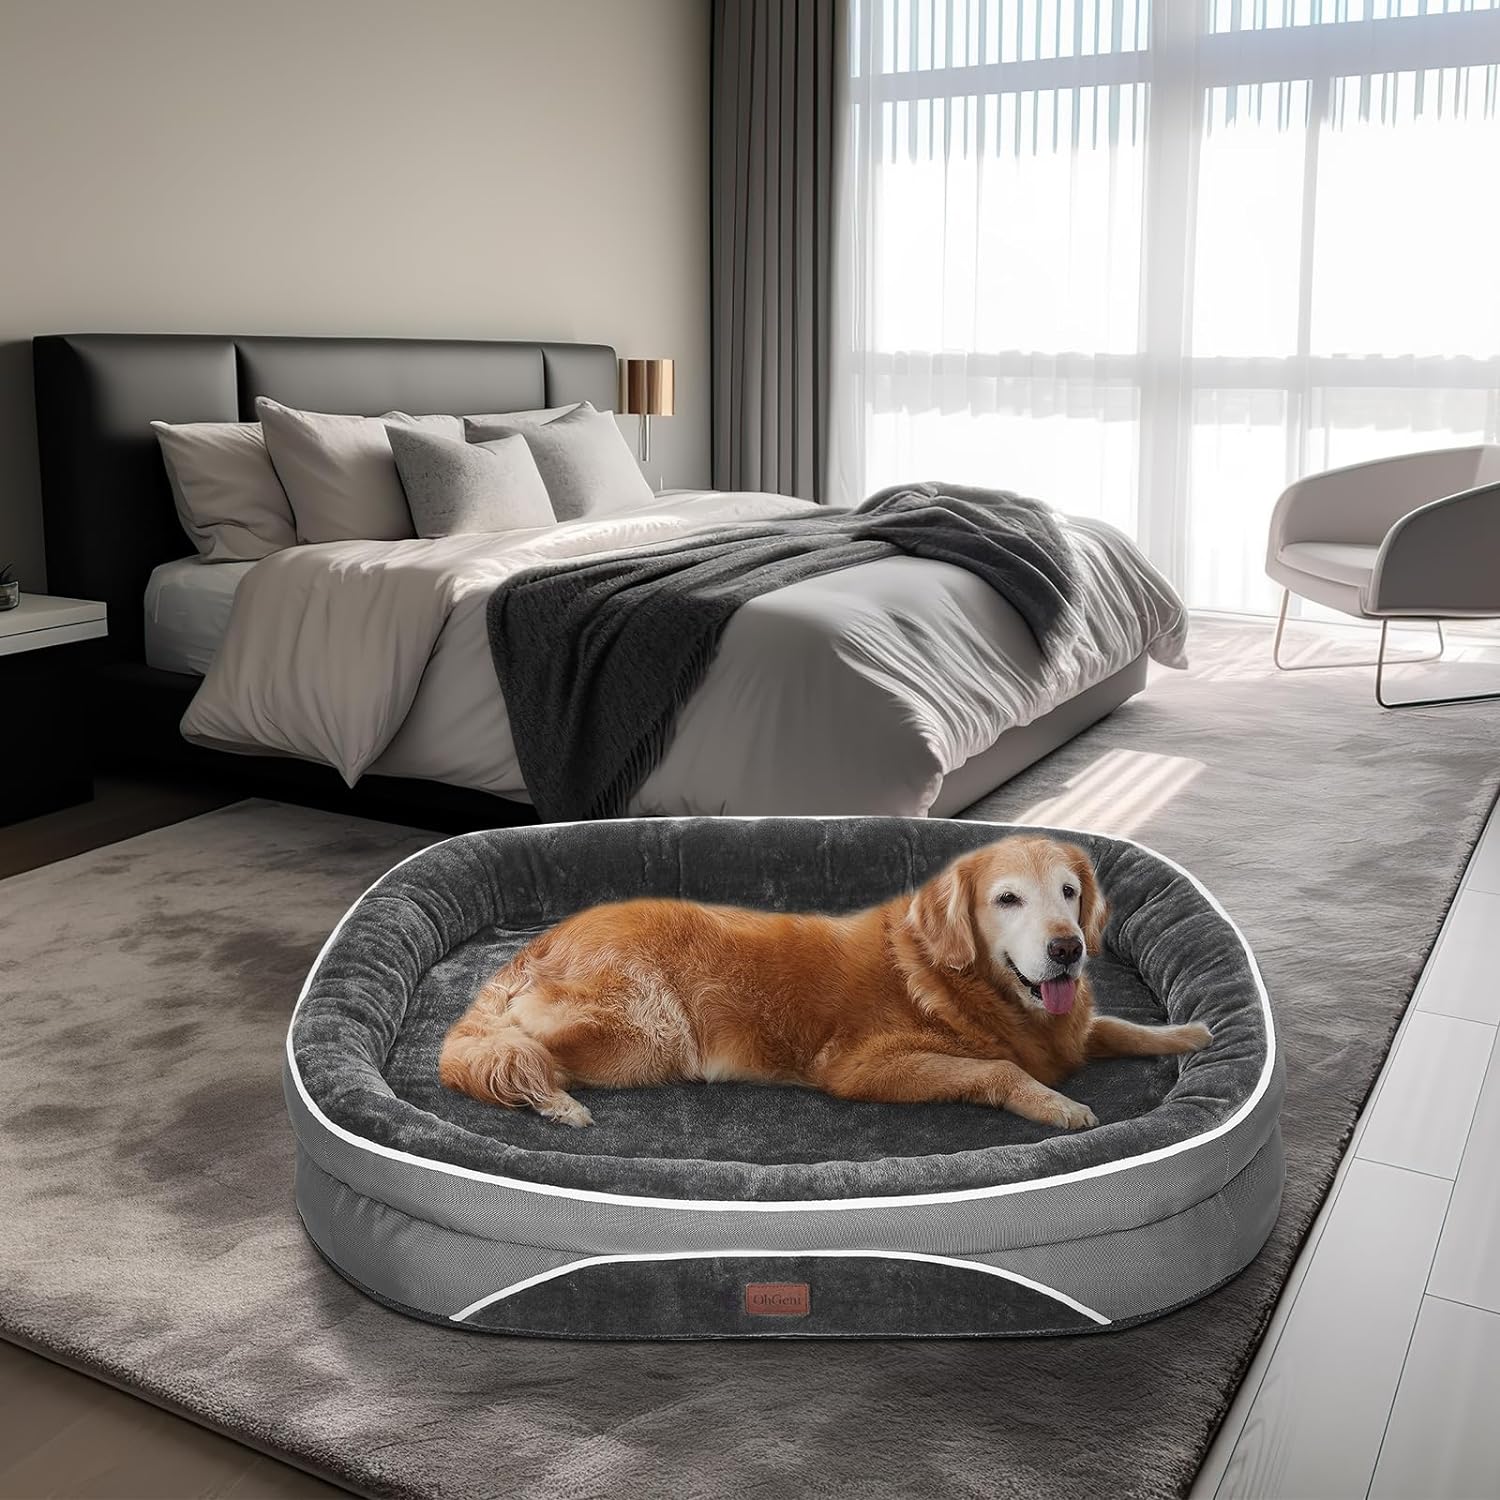 Orthopedic Dog Bed for Large Dogs, Oversized Couch Design with Egg Foam Support, Removable, Machine Washable Plush Cover and Non-Slip Bottom with Four Sided Bolster Cushion (Gray)